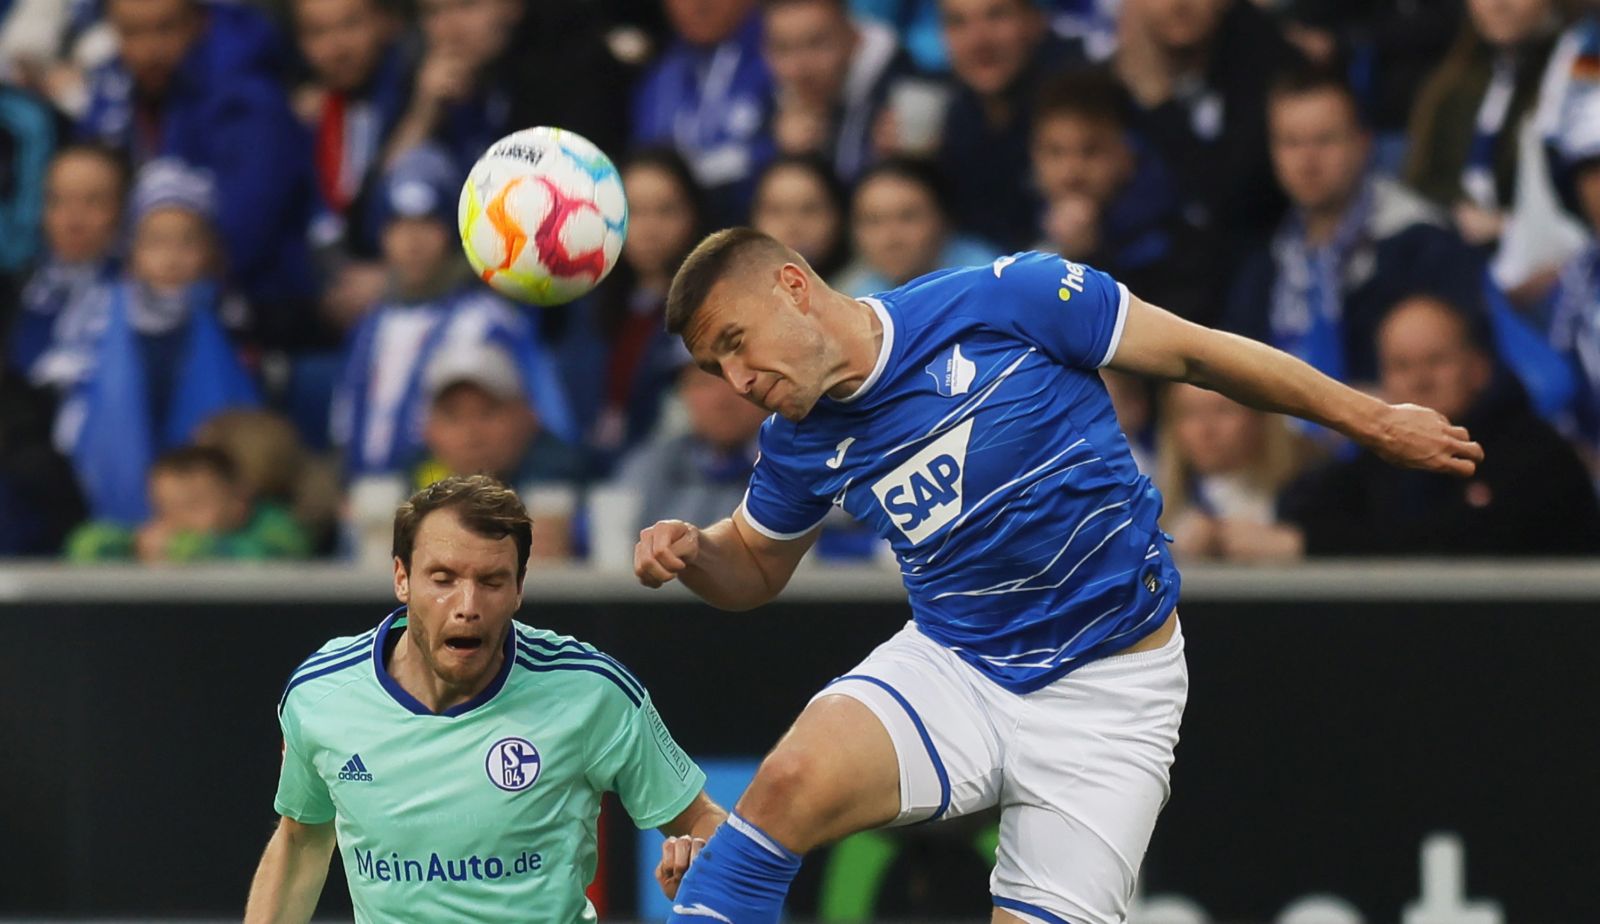 epa10566595 Hoffenheim's Pavel Kaderabek (R) in action against Schalke's Thomas Ouwejan (L) during the German Bundesliga soccer match between TSG 1899 Hoffenheim and FC Schalke 04 in Sinsheim, Germany, 09 April 2023.  EPA/RONALD WITTEK CONDITIONS - ATTENTION: The DFL regulations prohibit any use of photographs as image sequences and/or quasi-video.